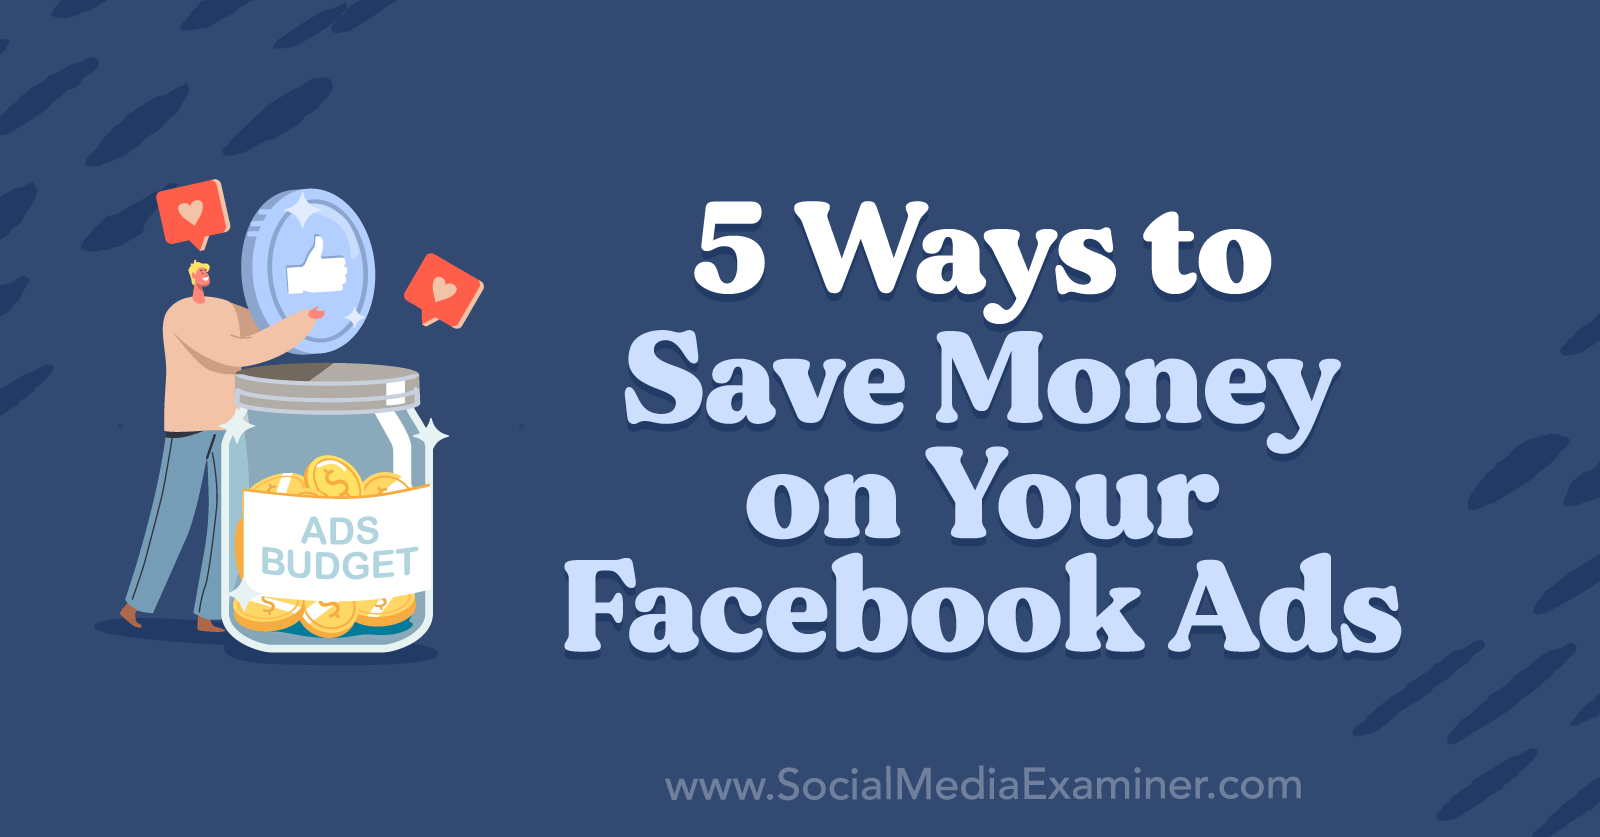 5 Ways to Save Money on Your Facebook Ads by Anna Sonnenberg